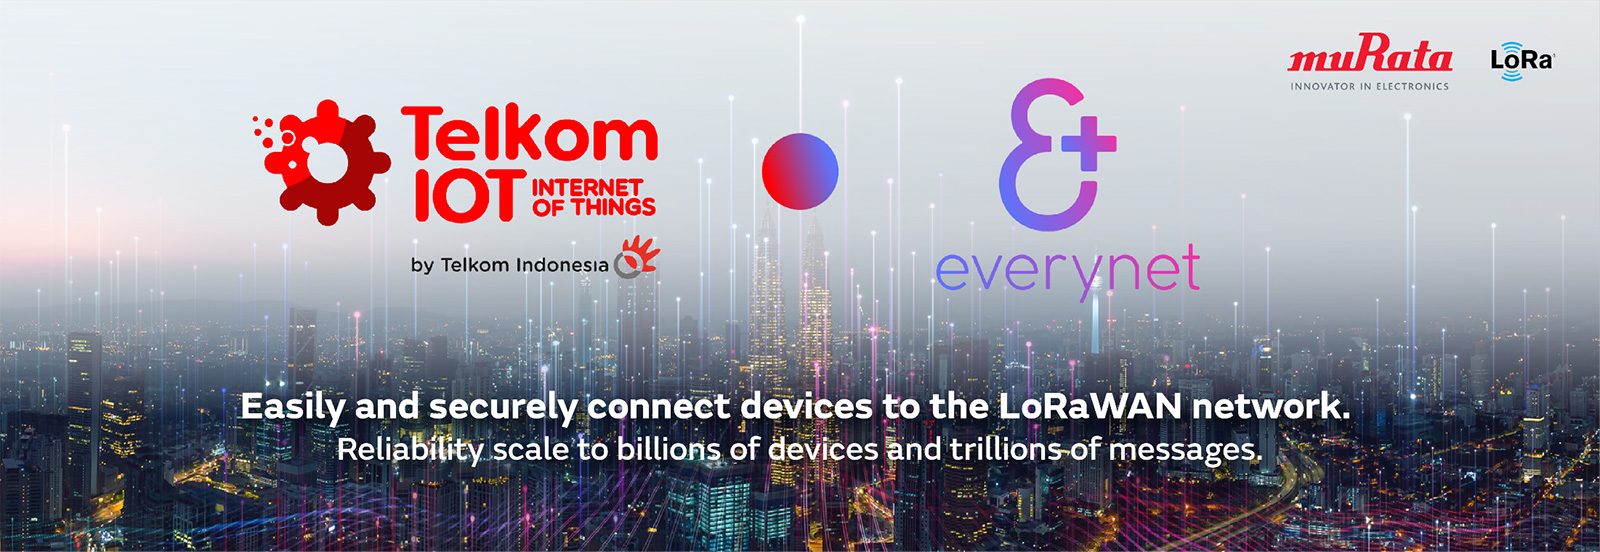 Murata’s certified module on Everynet LoRaWAN® network operated by Telkom Indonesia change the dynamics of Industrial Revolution 4.0 to enable millions of connected IoT devices